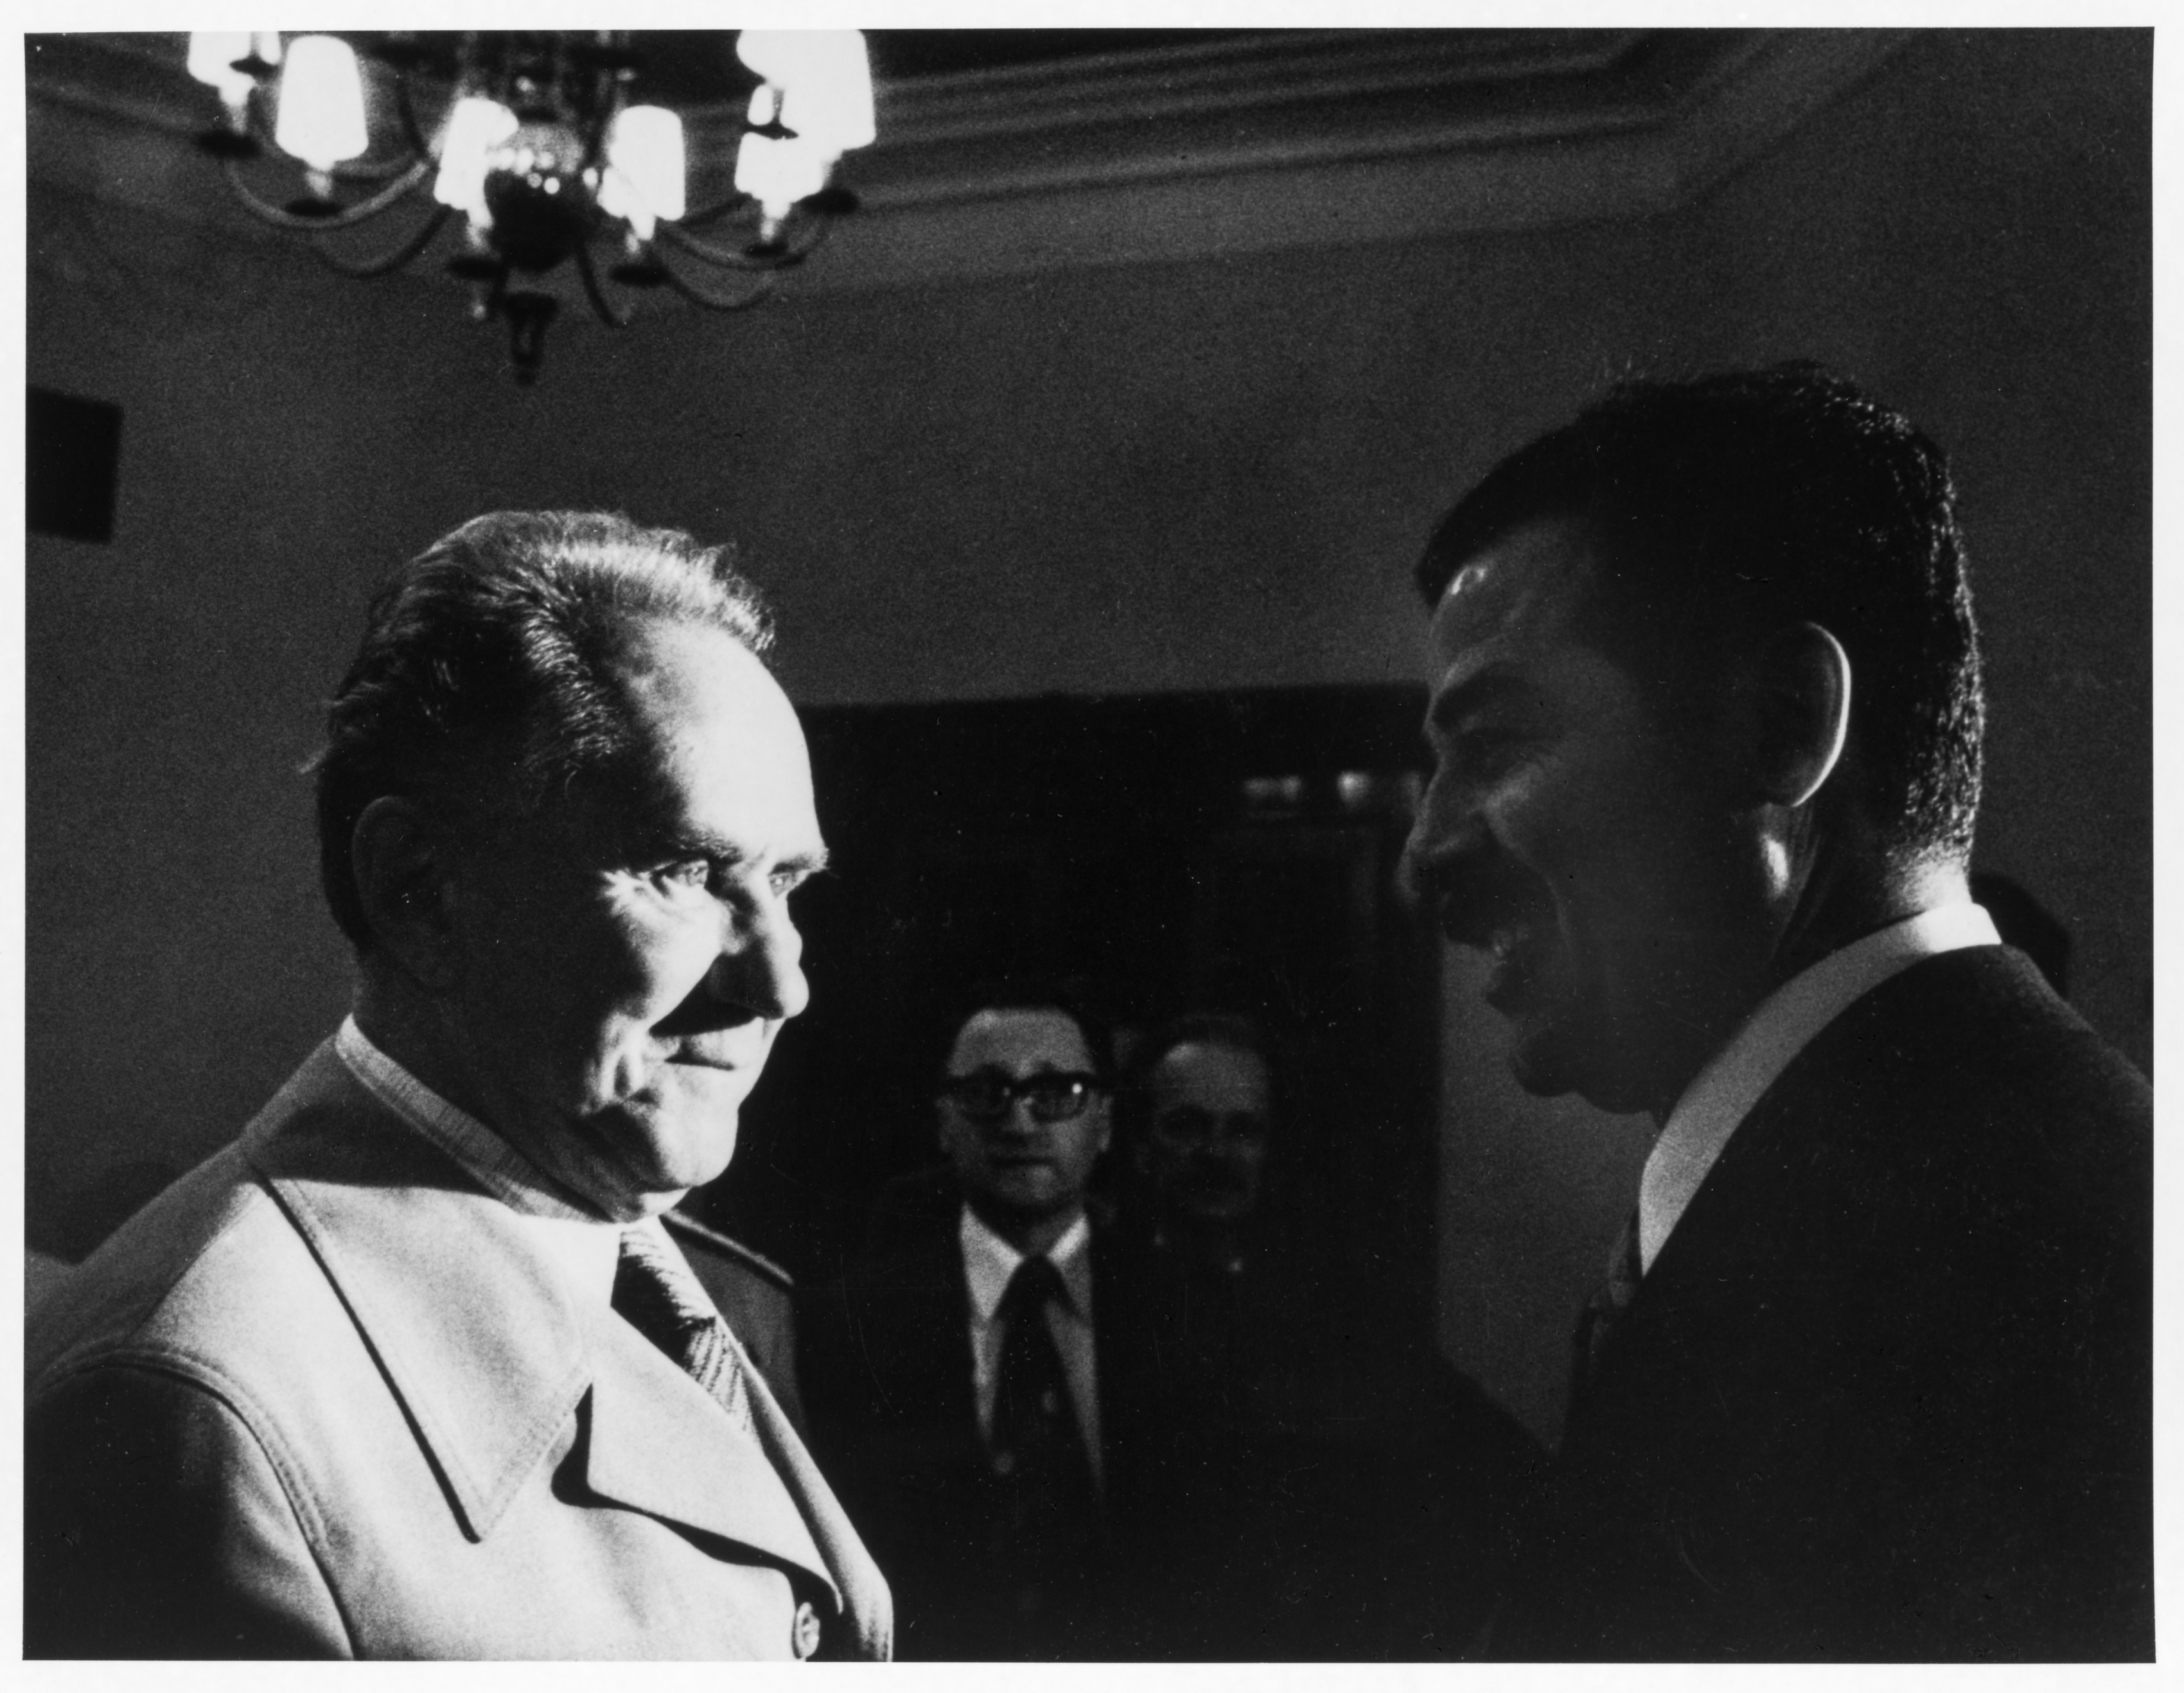 Kosygin (in light) with Saddam Hussein (in shadow), Baghdad